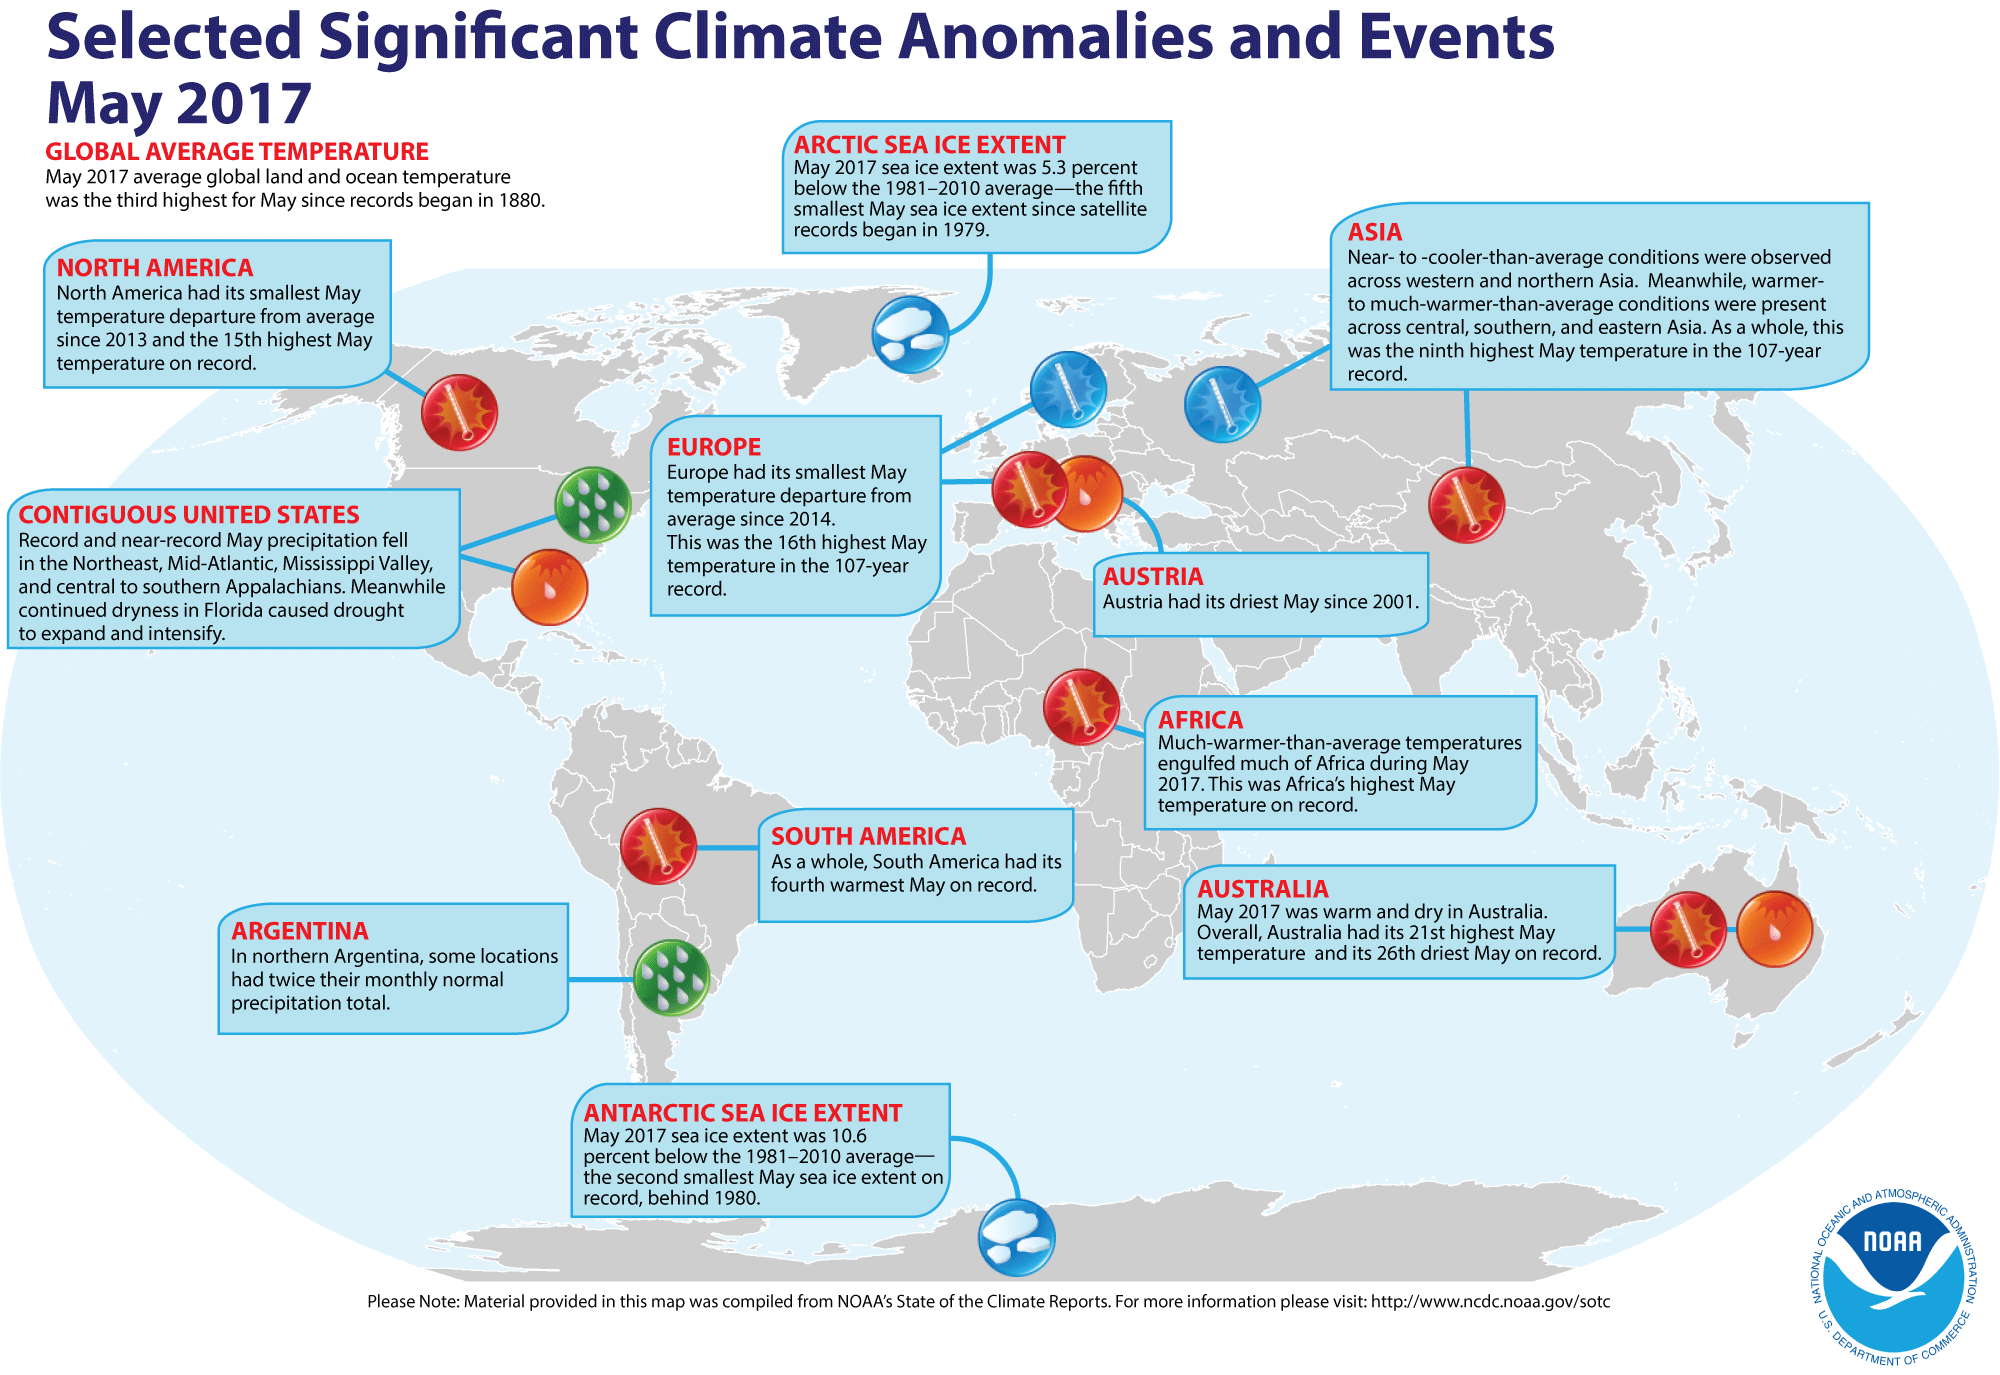 A map of noteworthy climate events around the world in May.